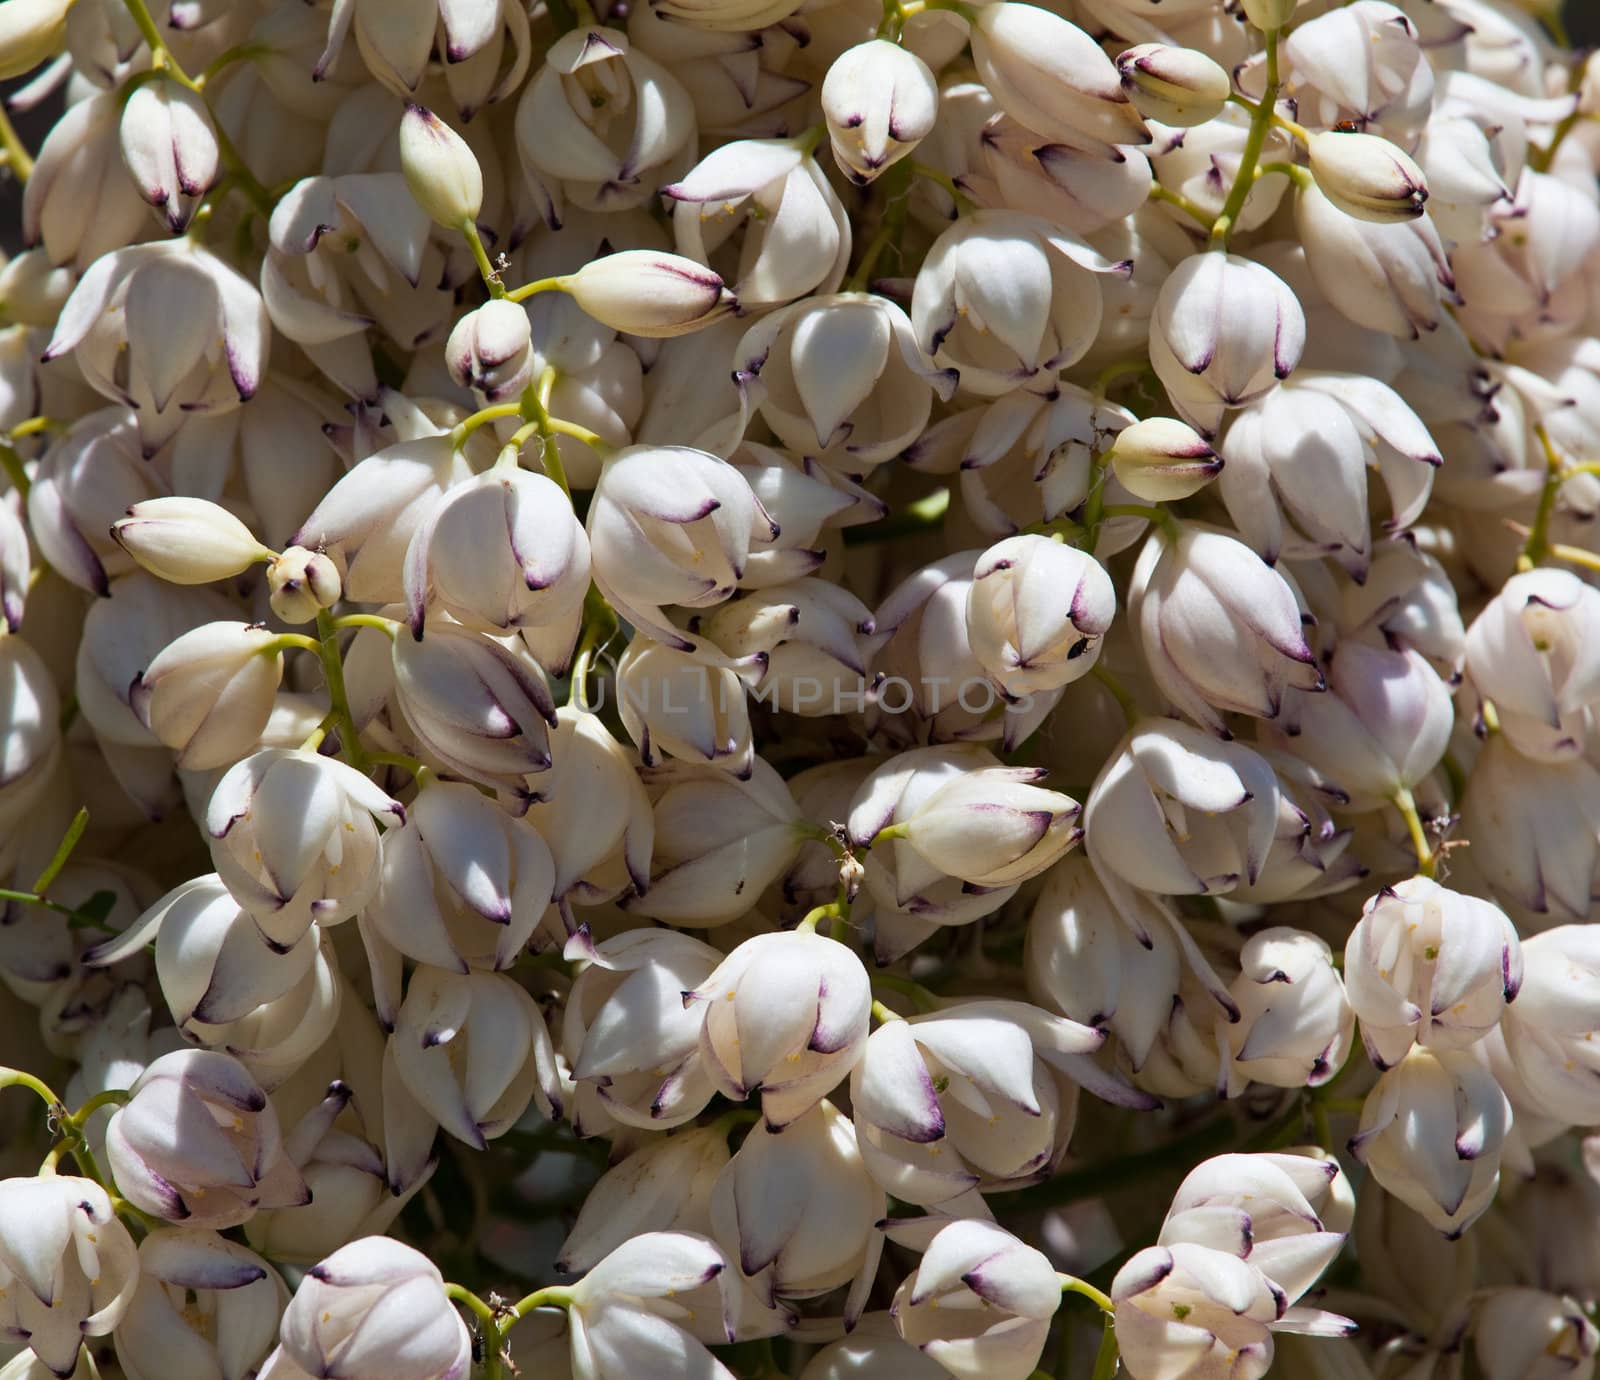 Mojave Yucca blossoms by steheap